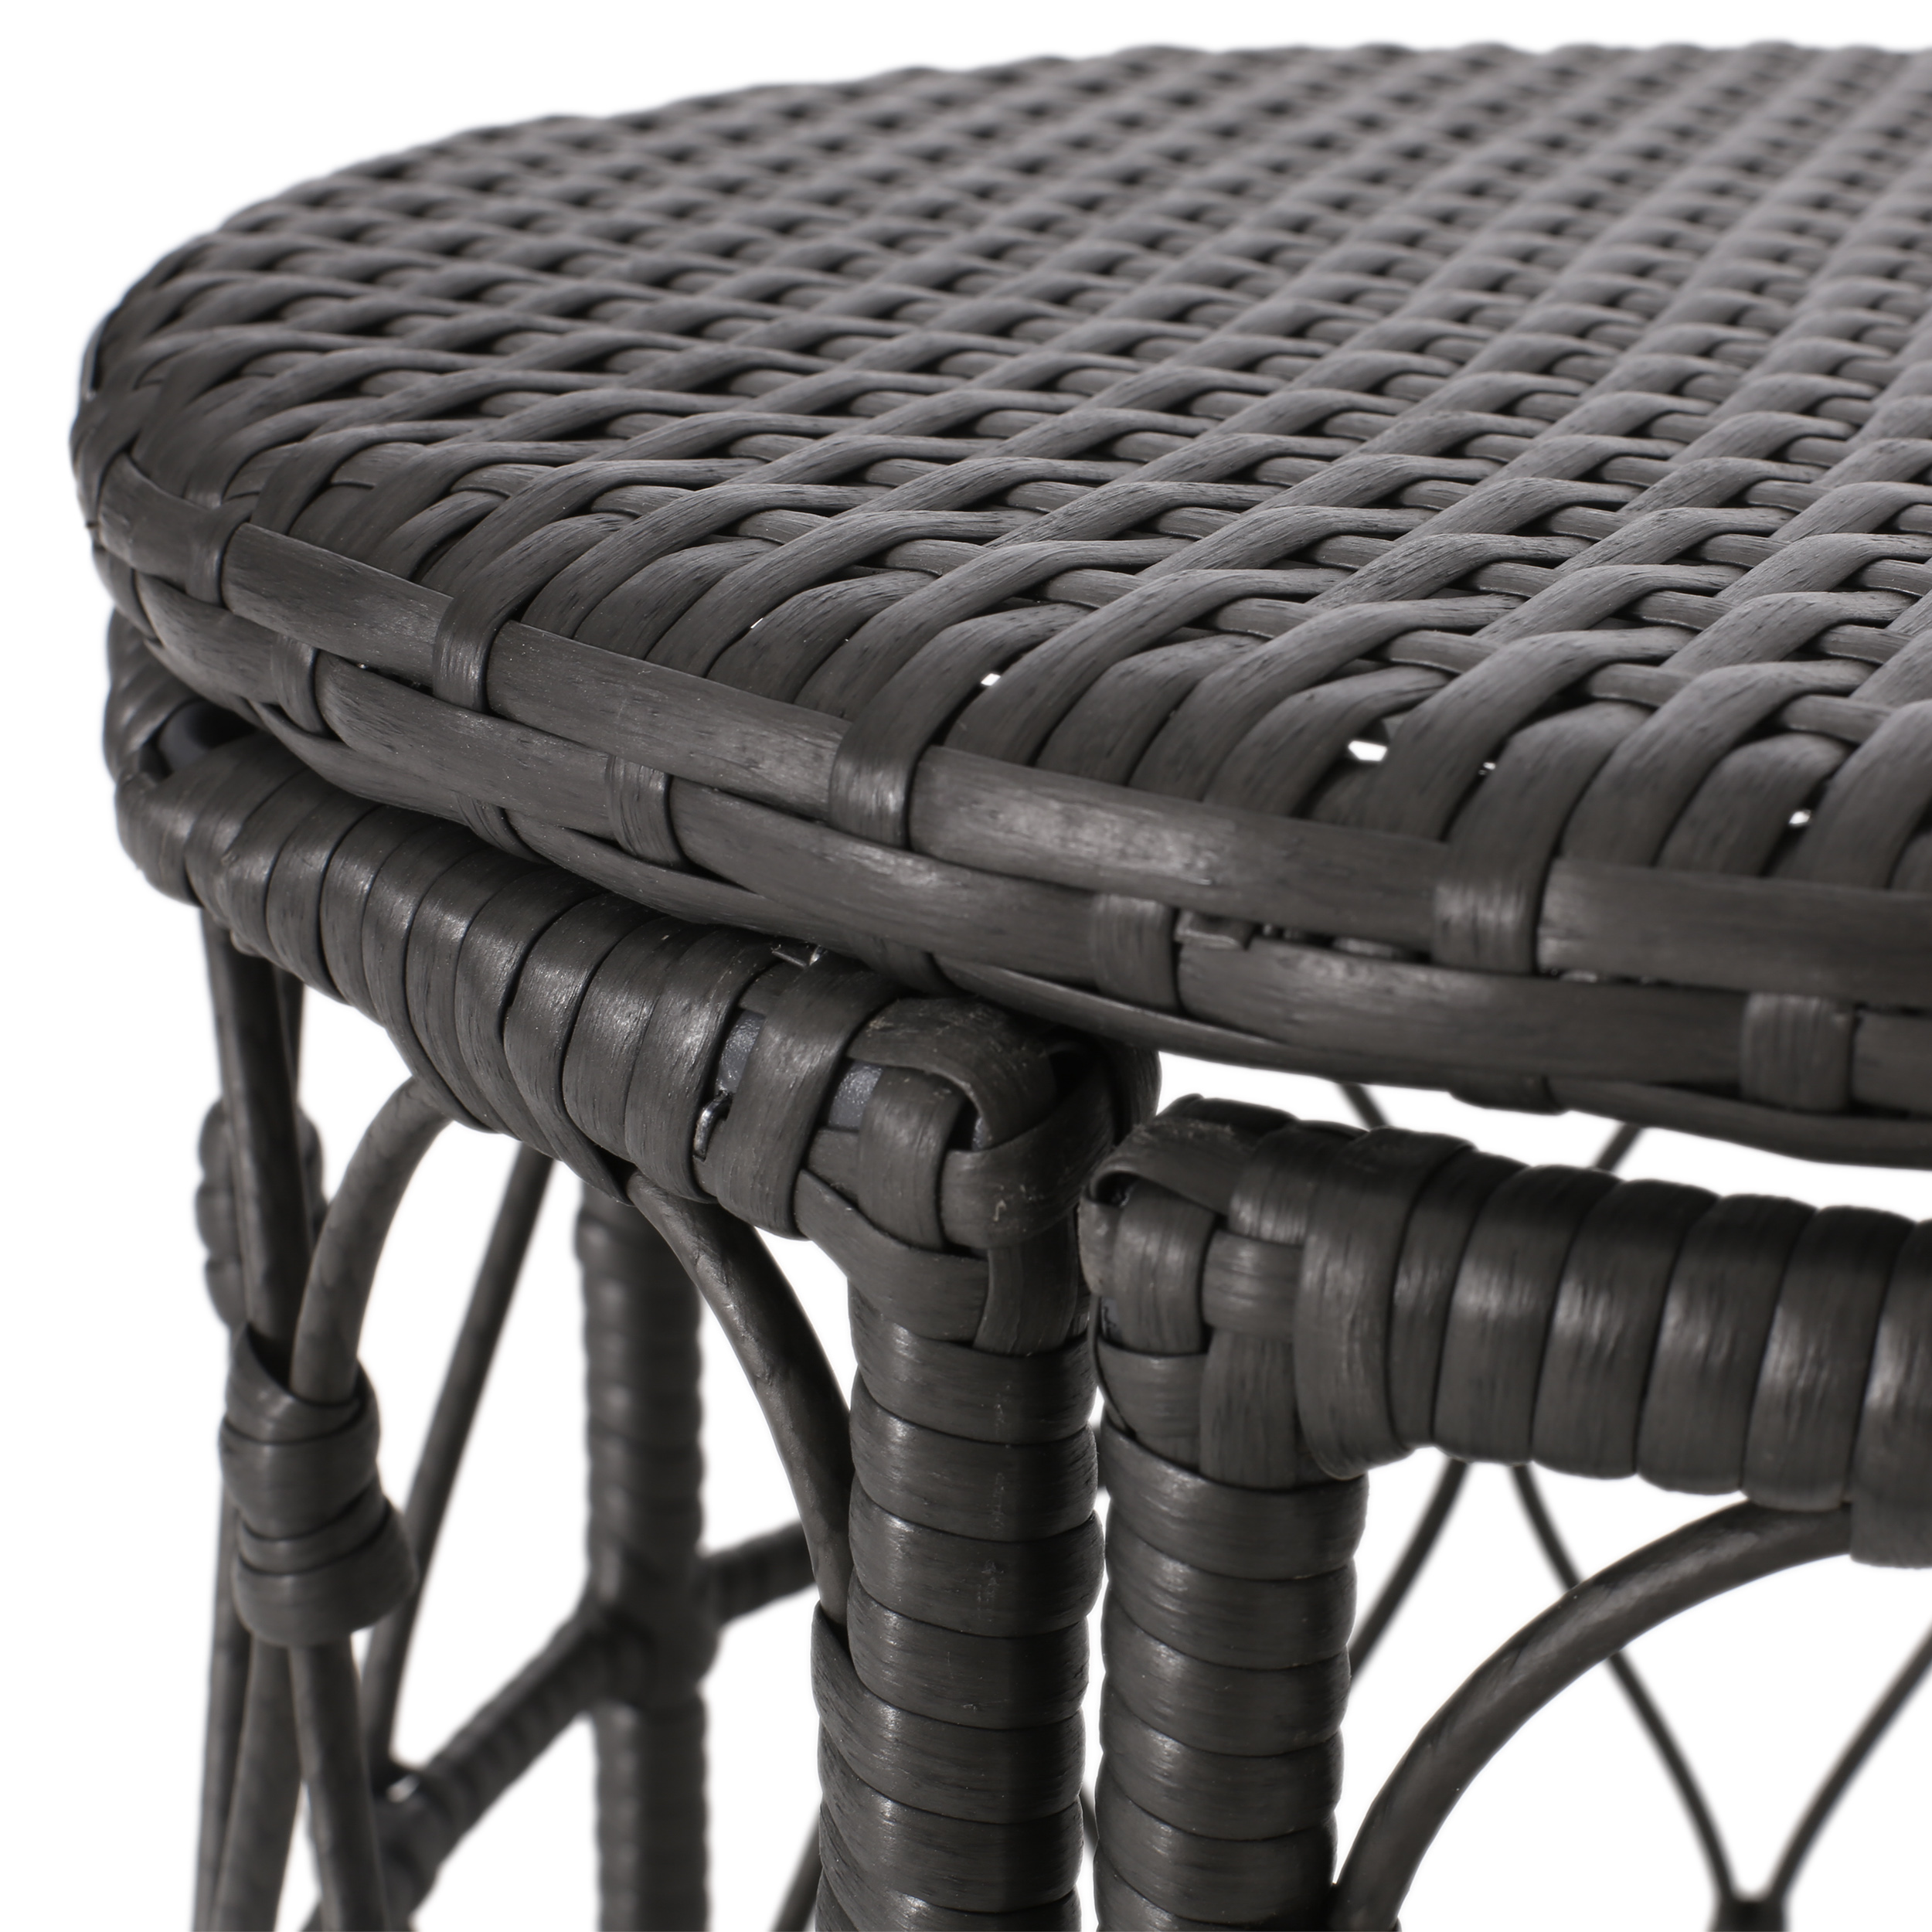 GDF Studio Colmar Outdoor Wicker Coffee Table, Faux Rattan and Iron, Gray - image 5 of 9